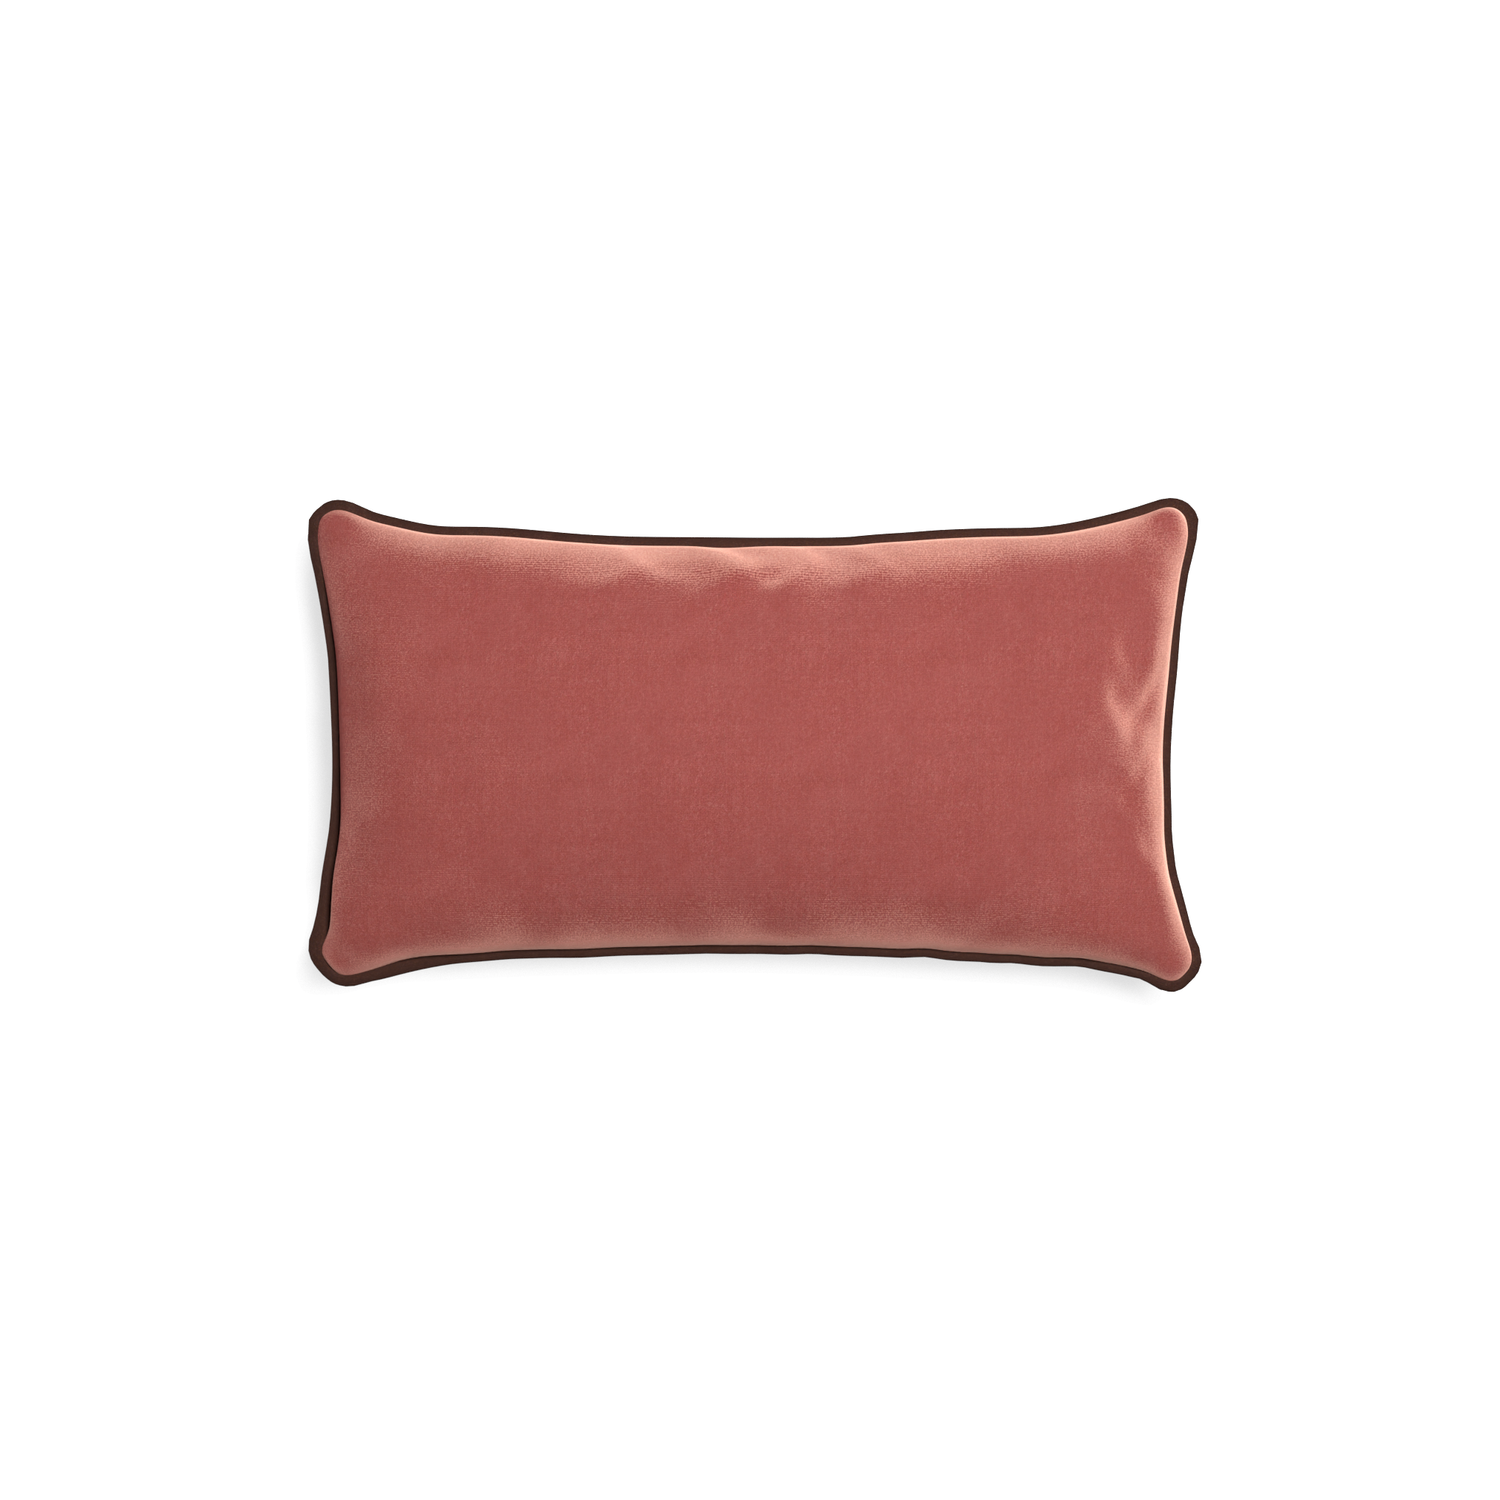 rectangle coral velvet pillow with brown piping